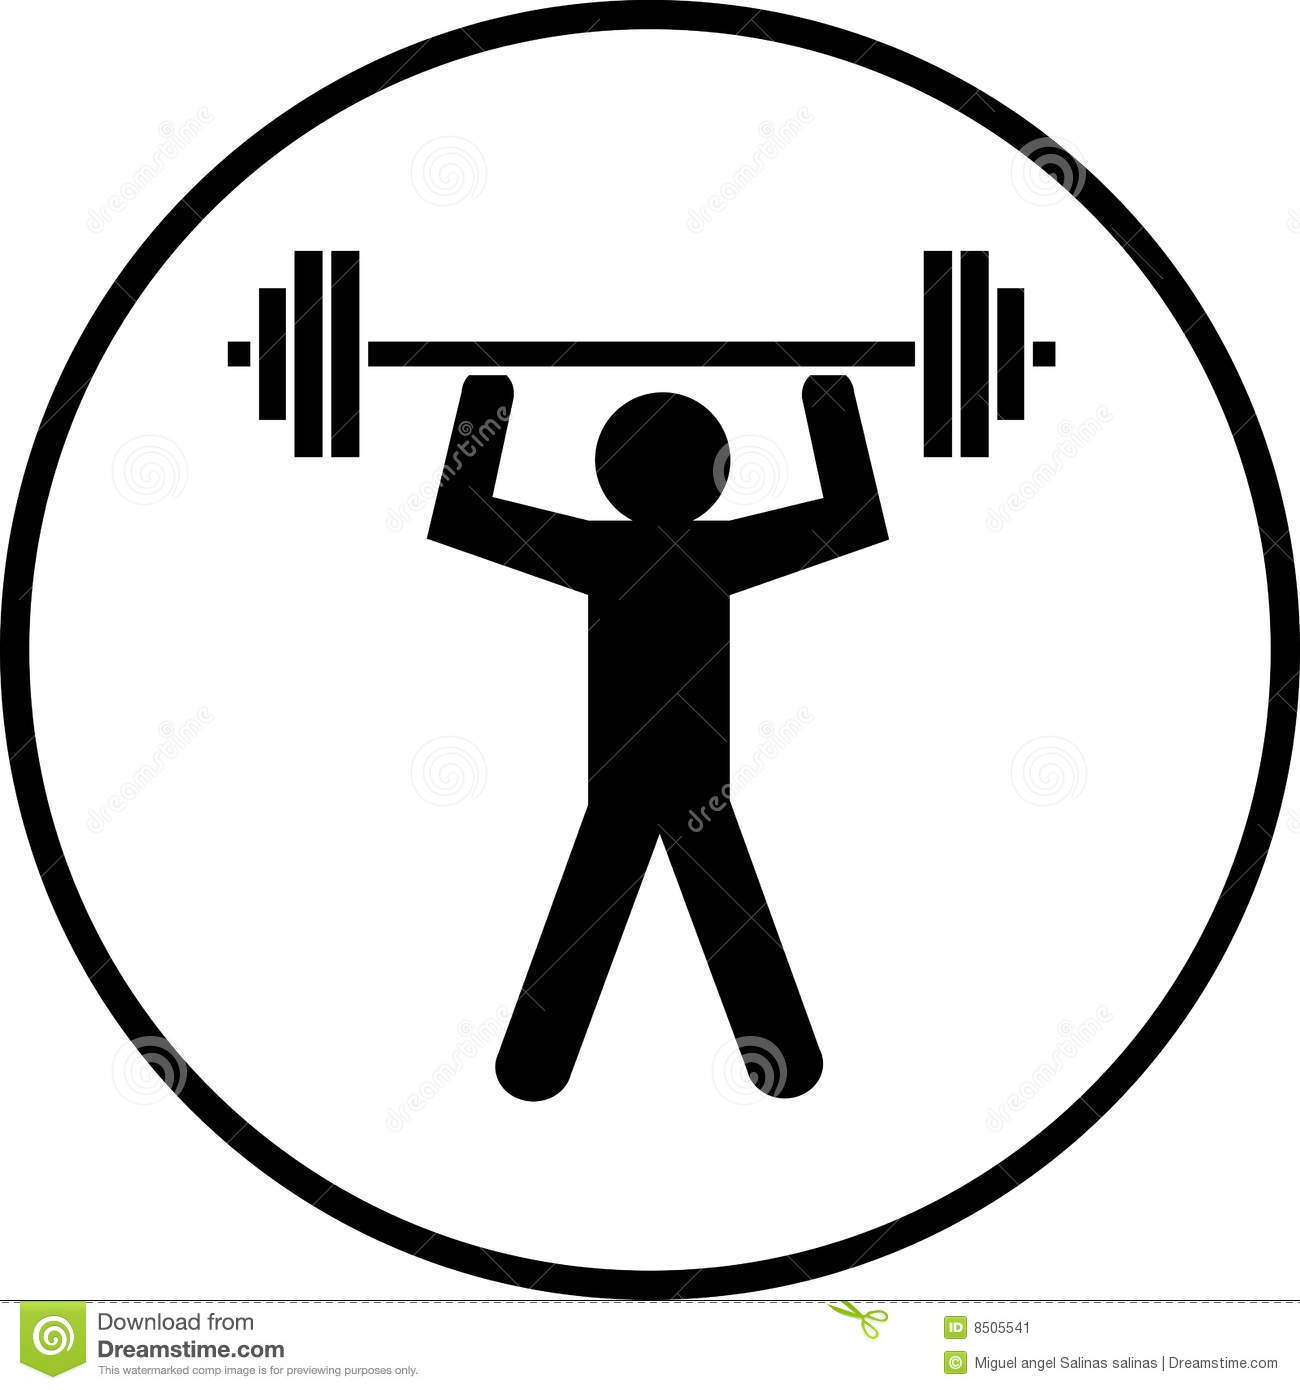 Weights Lifting Body Builder Symbol Vector Stock Image   Image